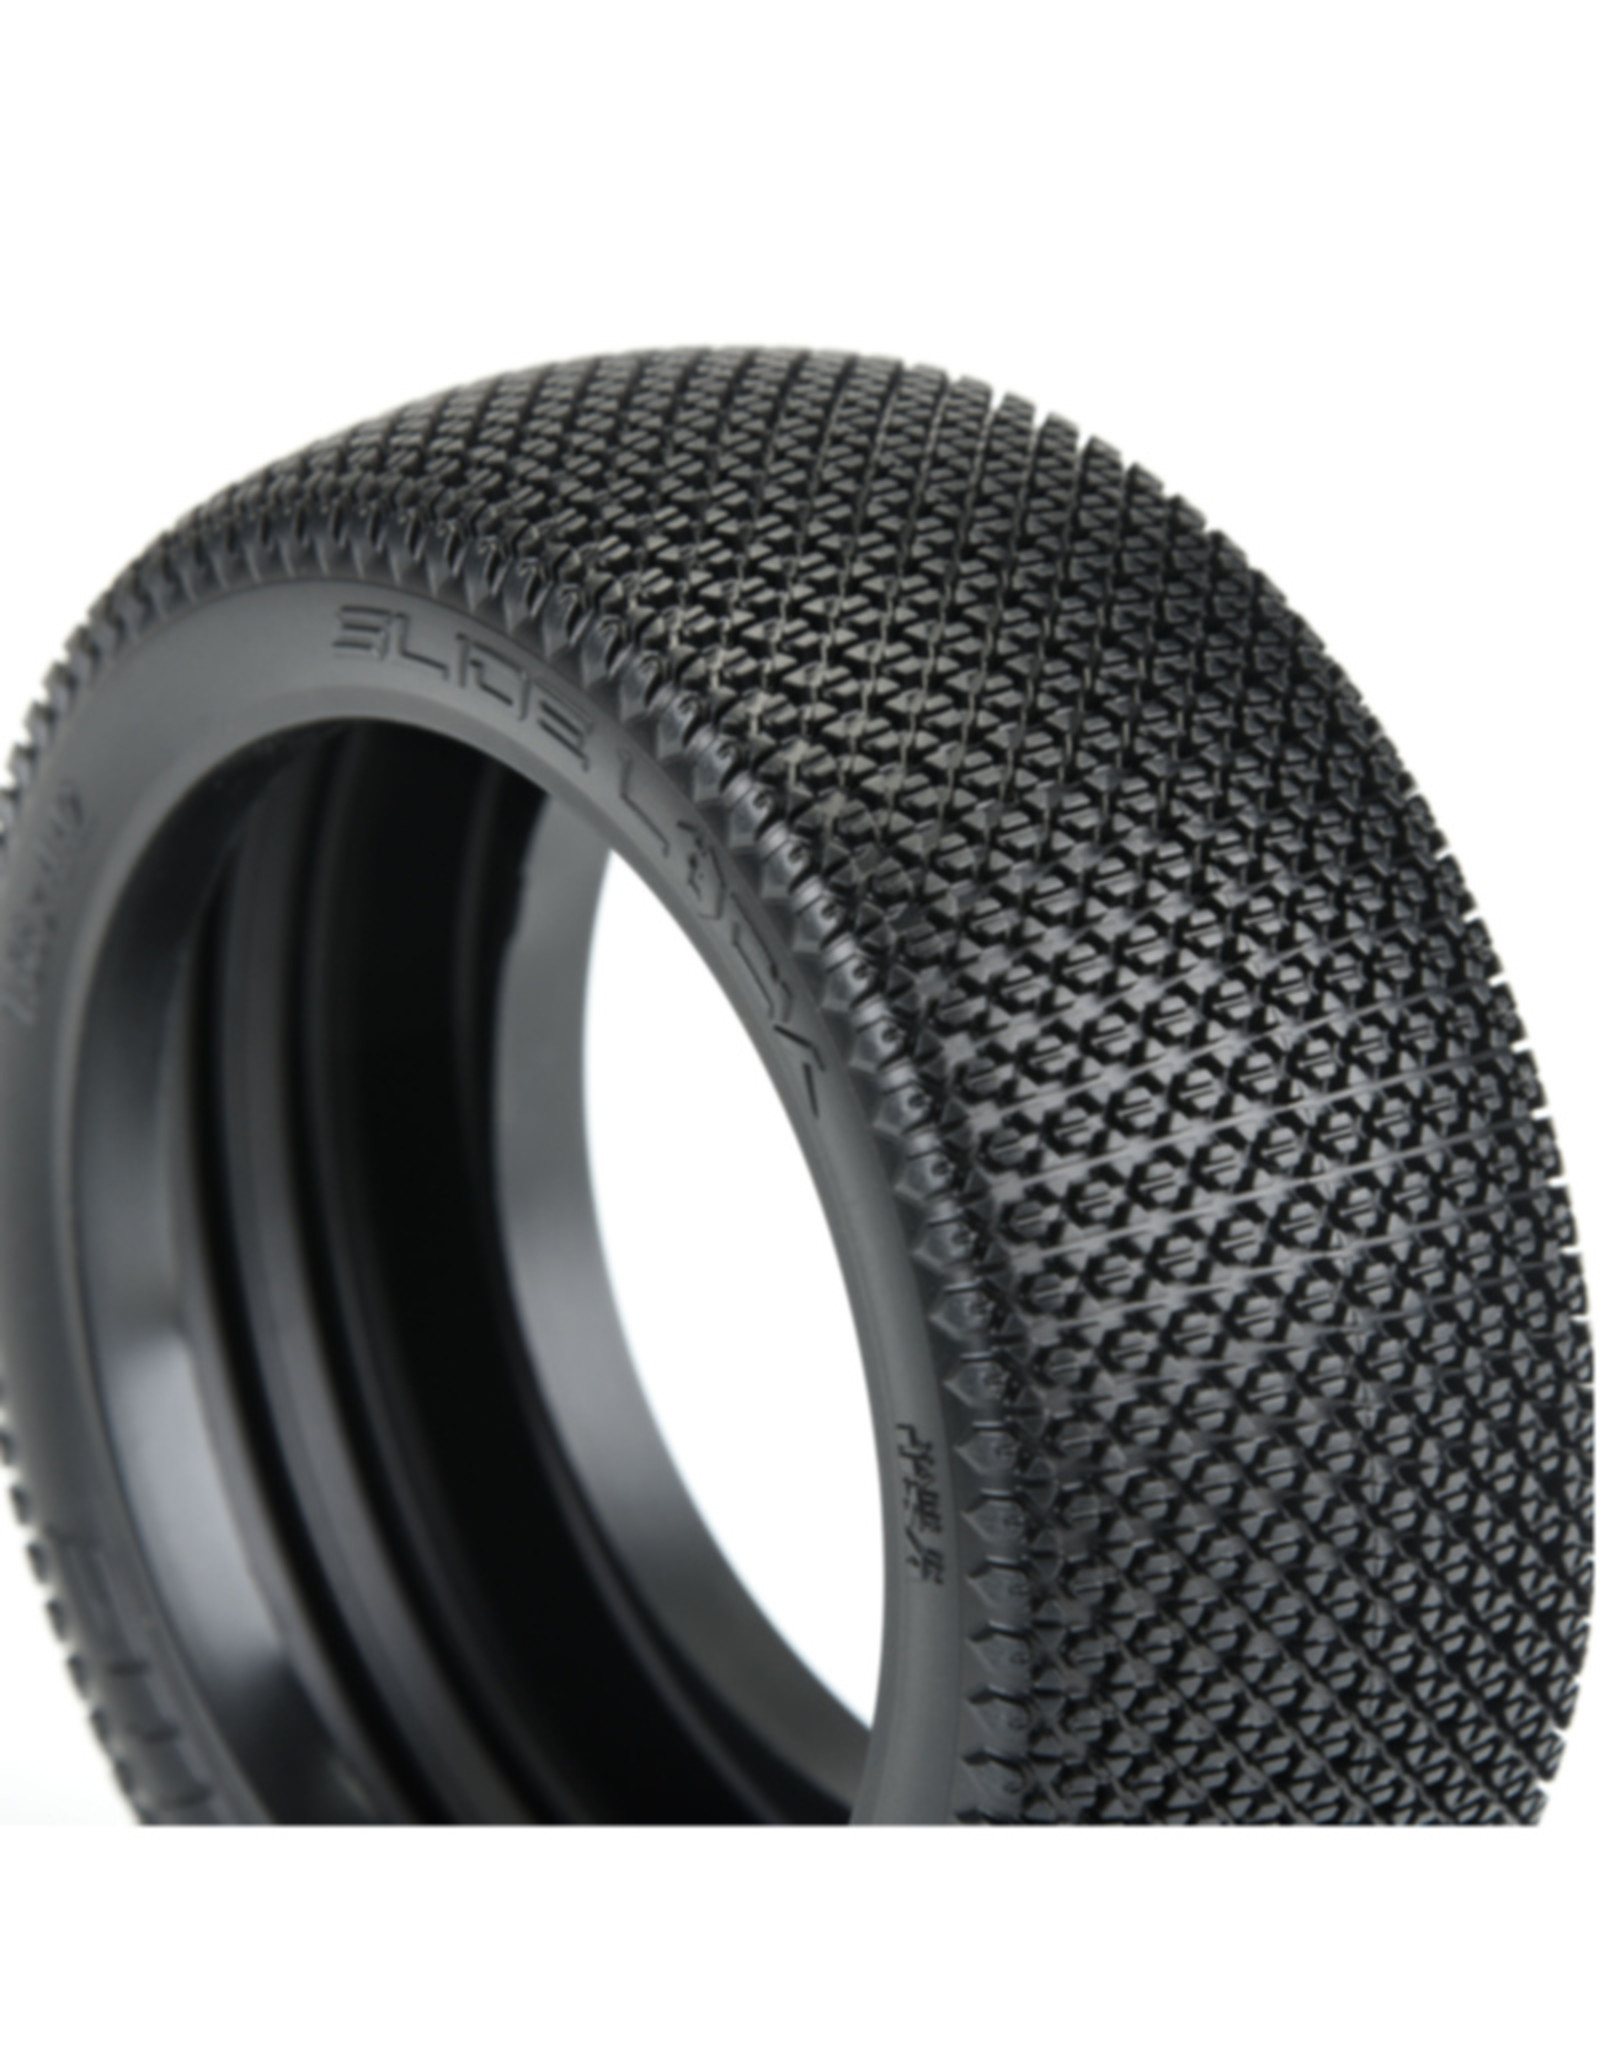 Pro-Line Racing PRO9064204  1/8 Slide Lock S4 Front/Rear Off-Road Buggy Tires (2)